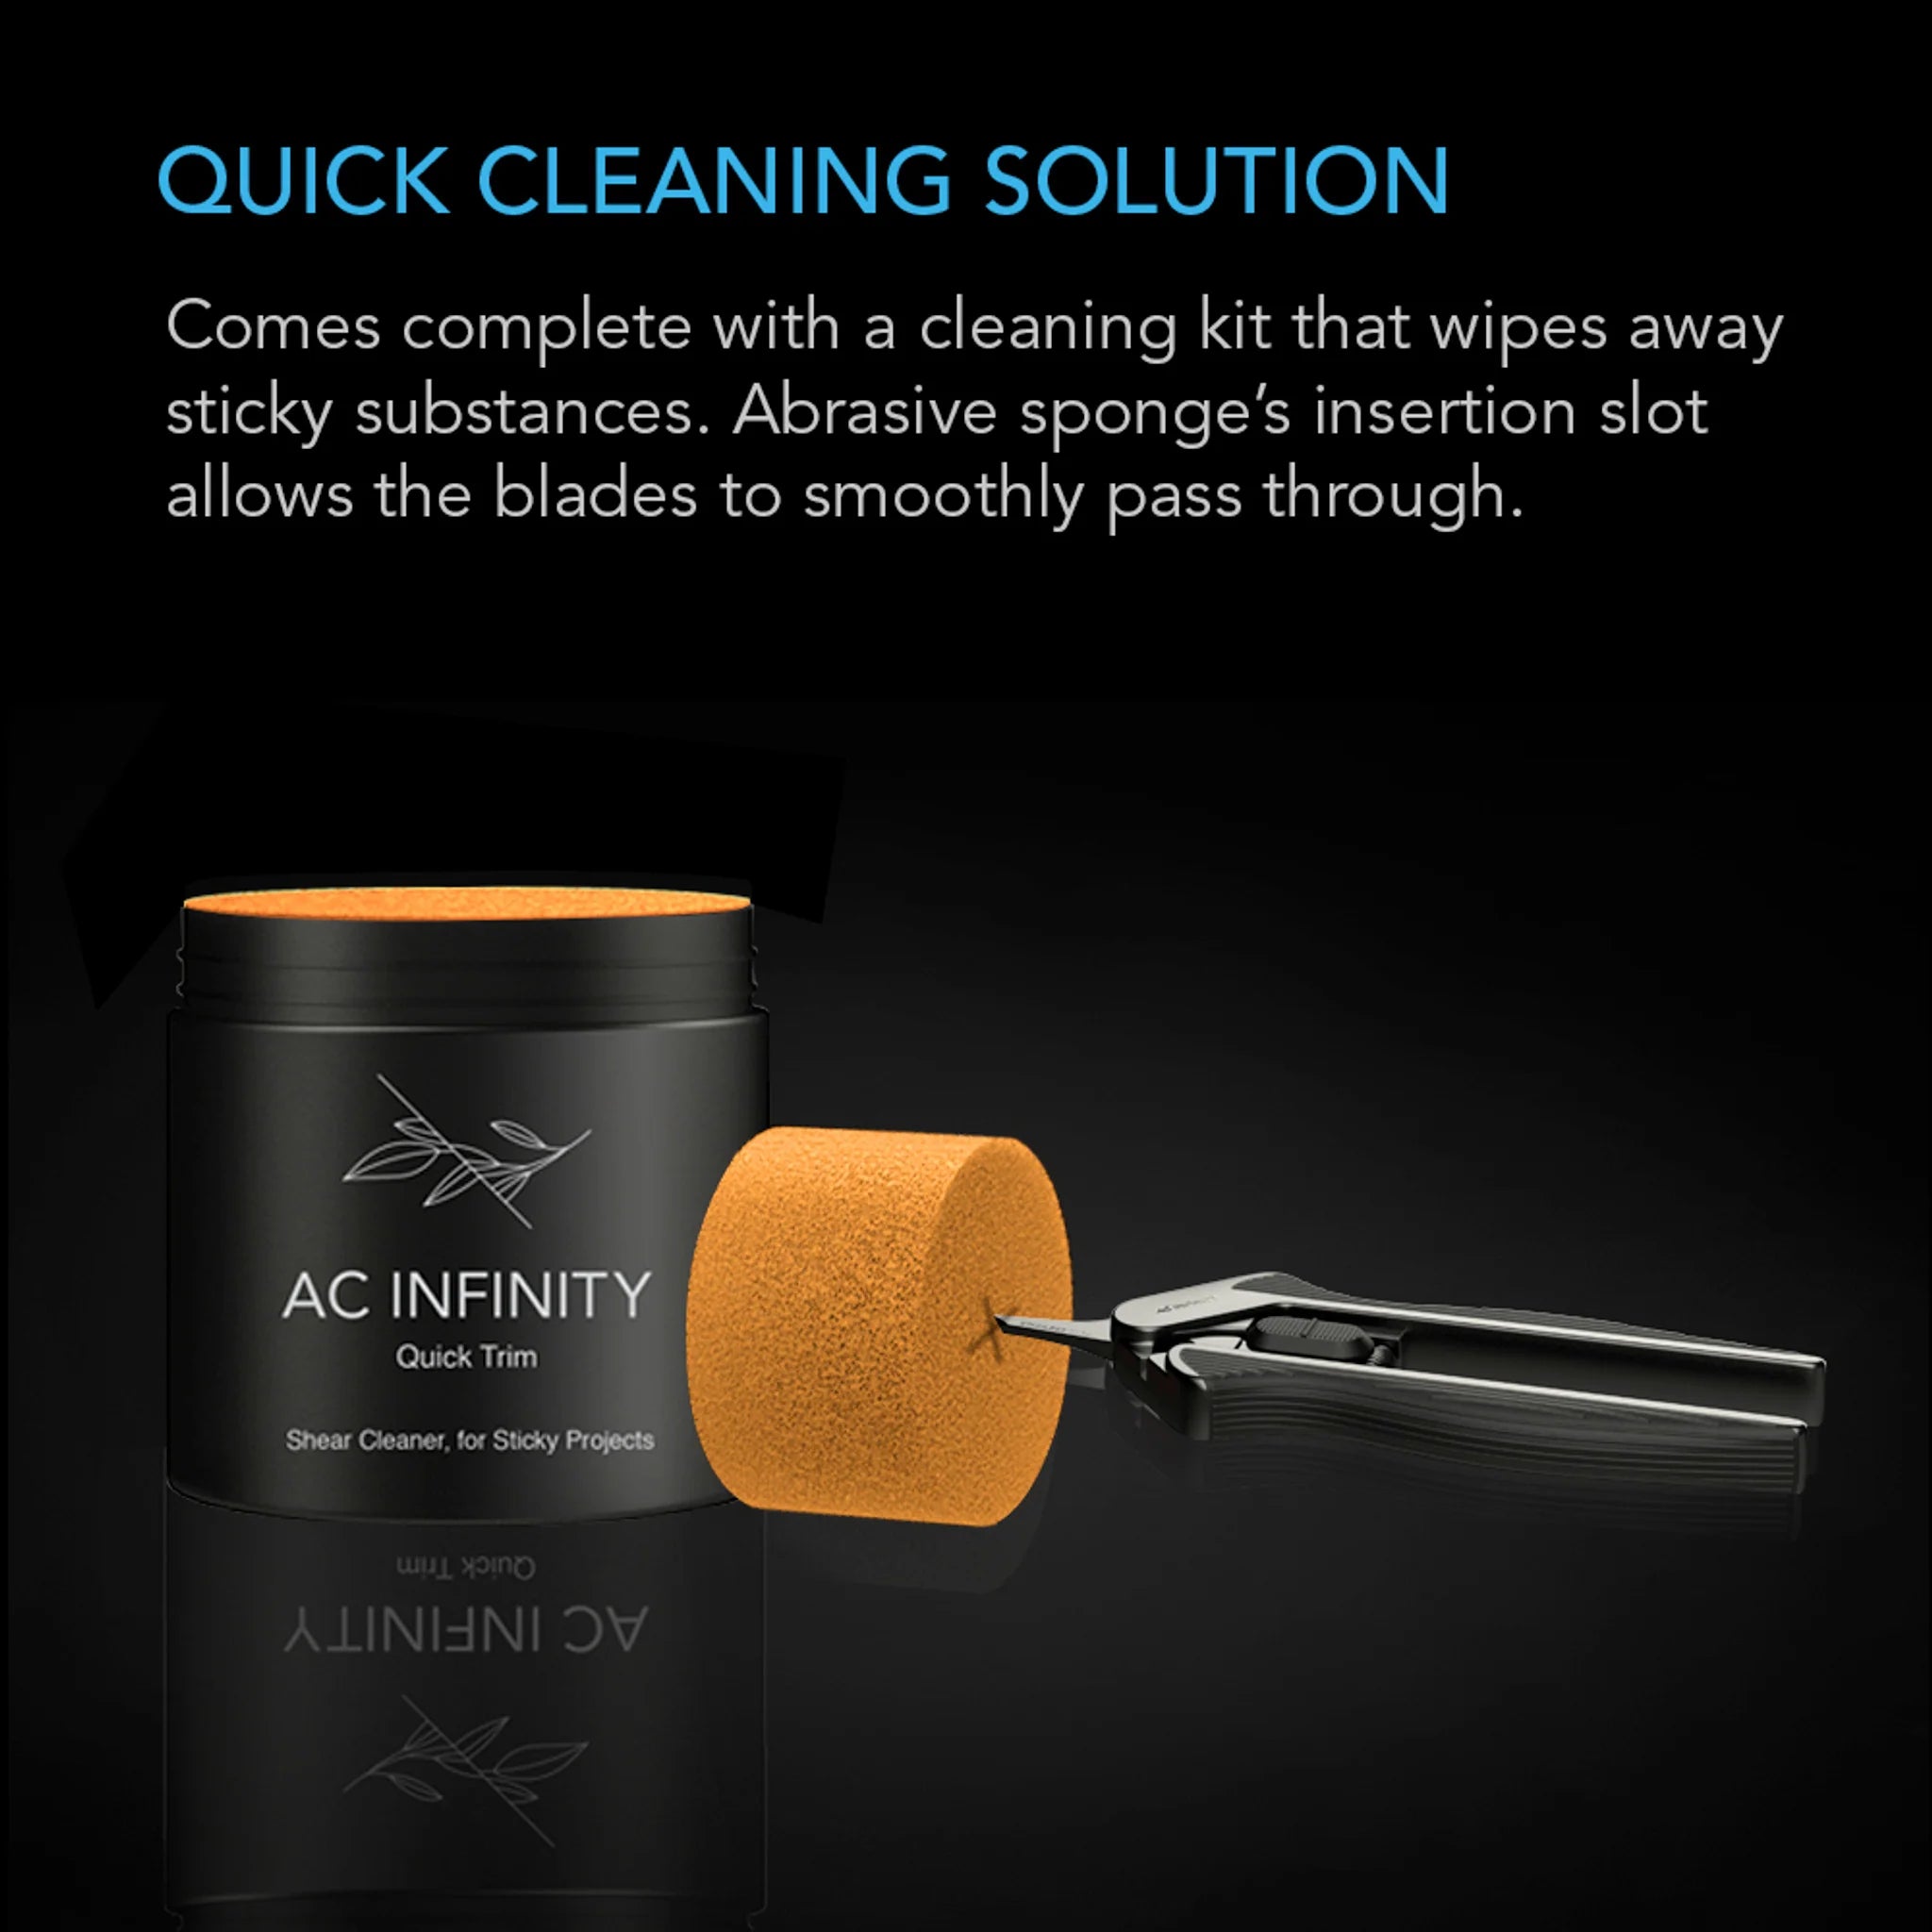 Trimming, Drying & Curing AC INFINITY Stainless Steel Straight Pruning Scissors + Cleaning Kit,